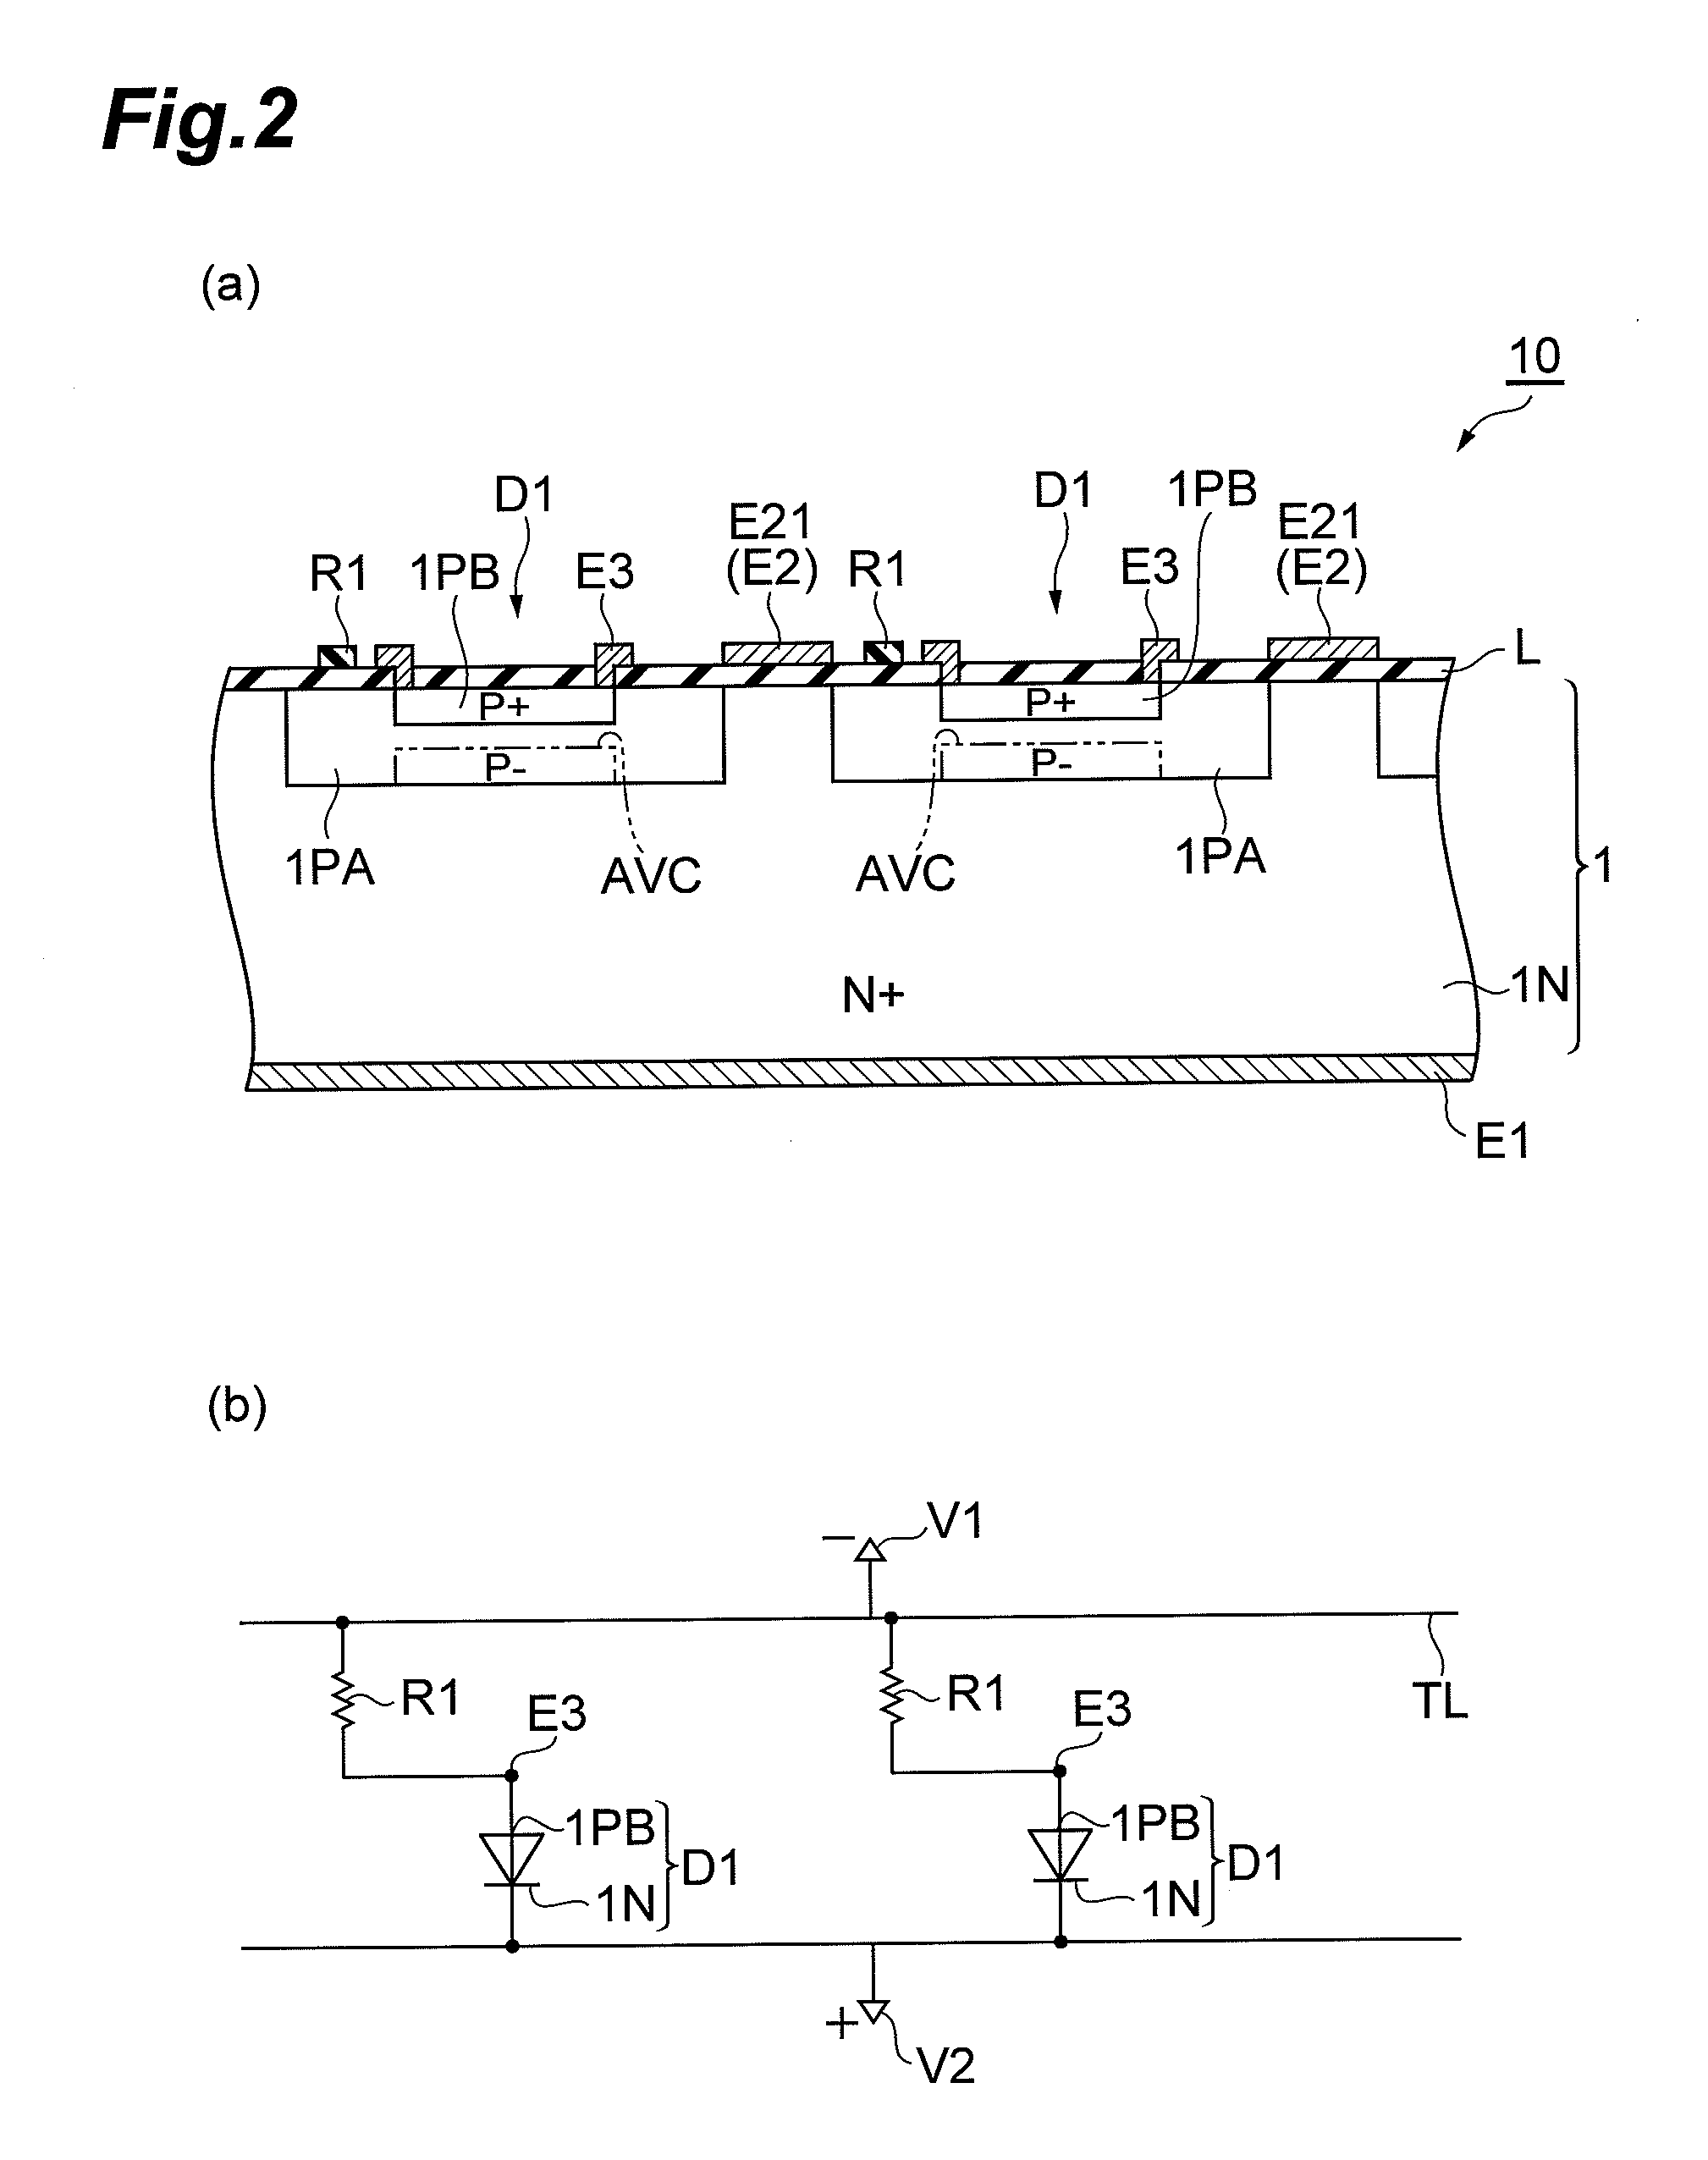 Photodiode array, method for determining reference voltage, and method for determining recommended operating voltage